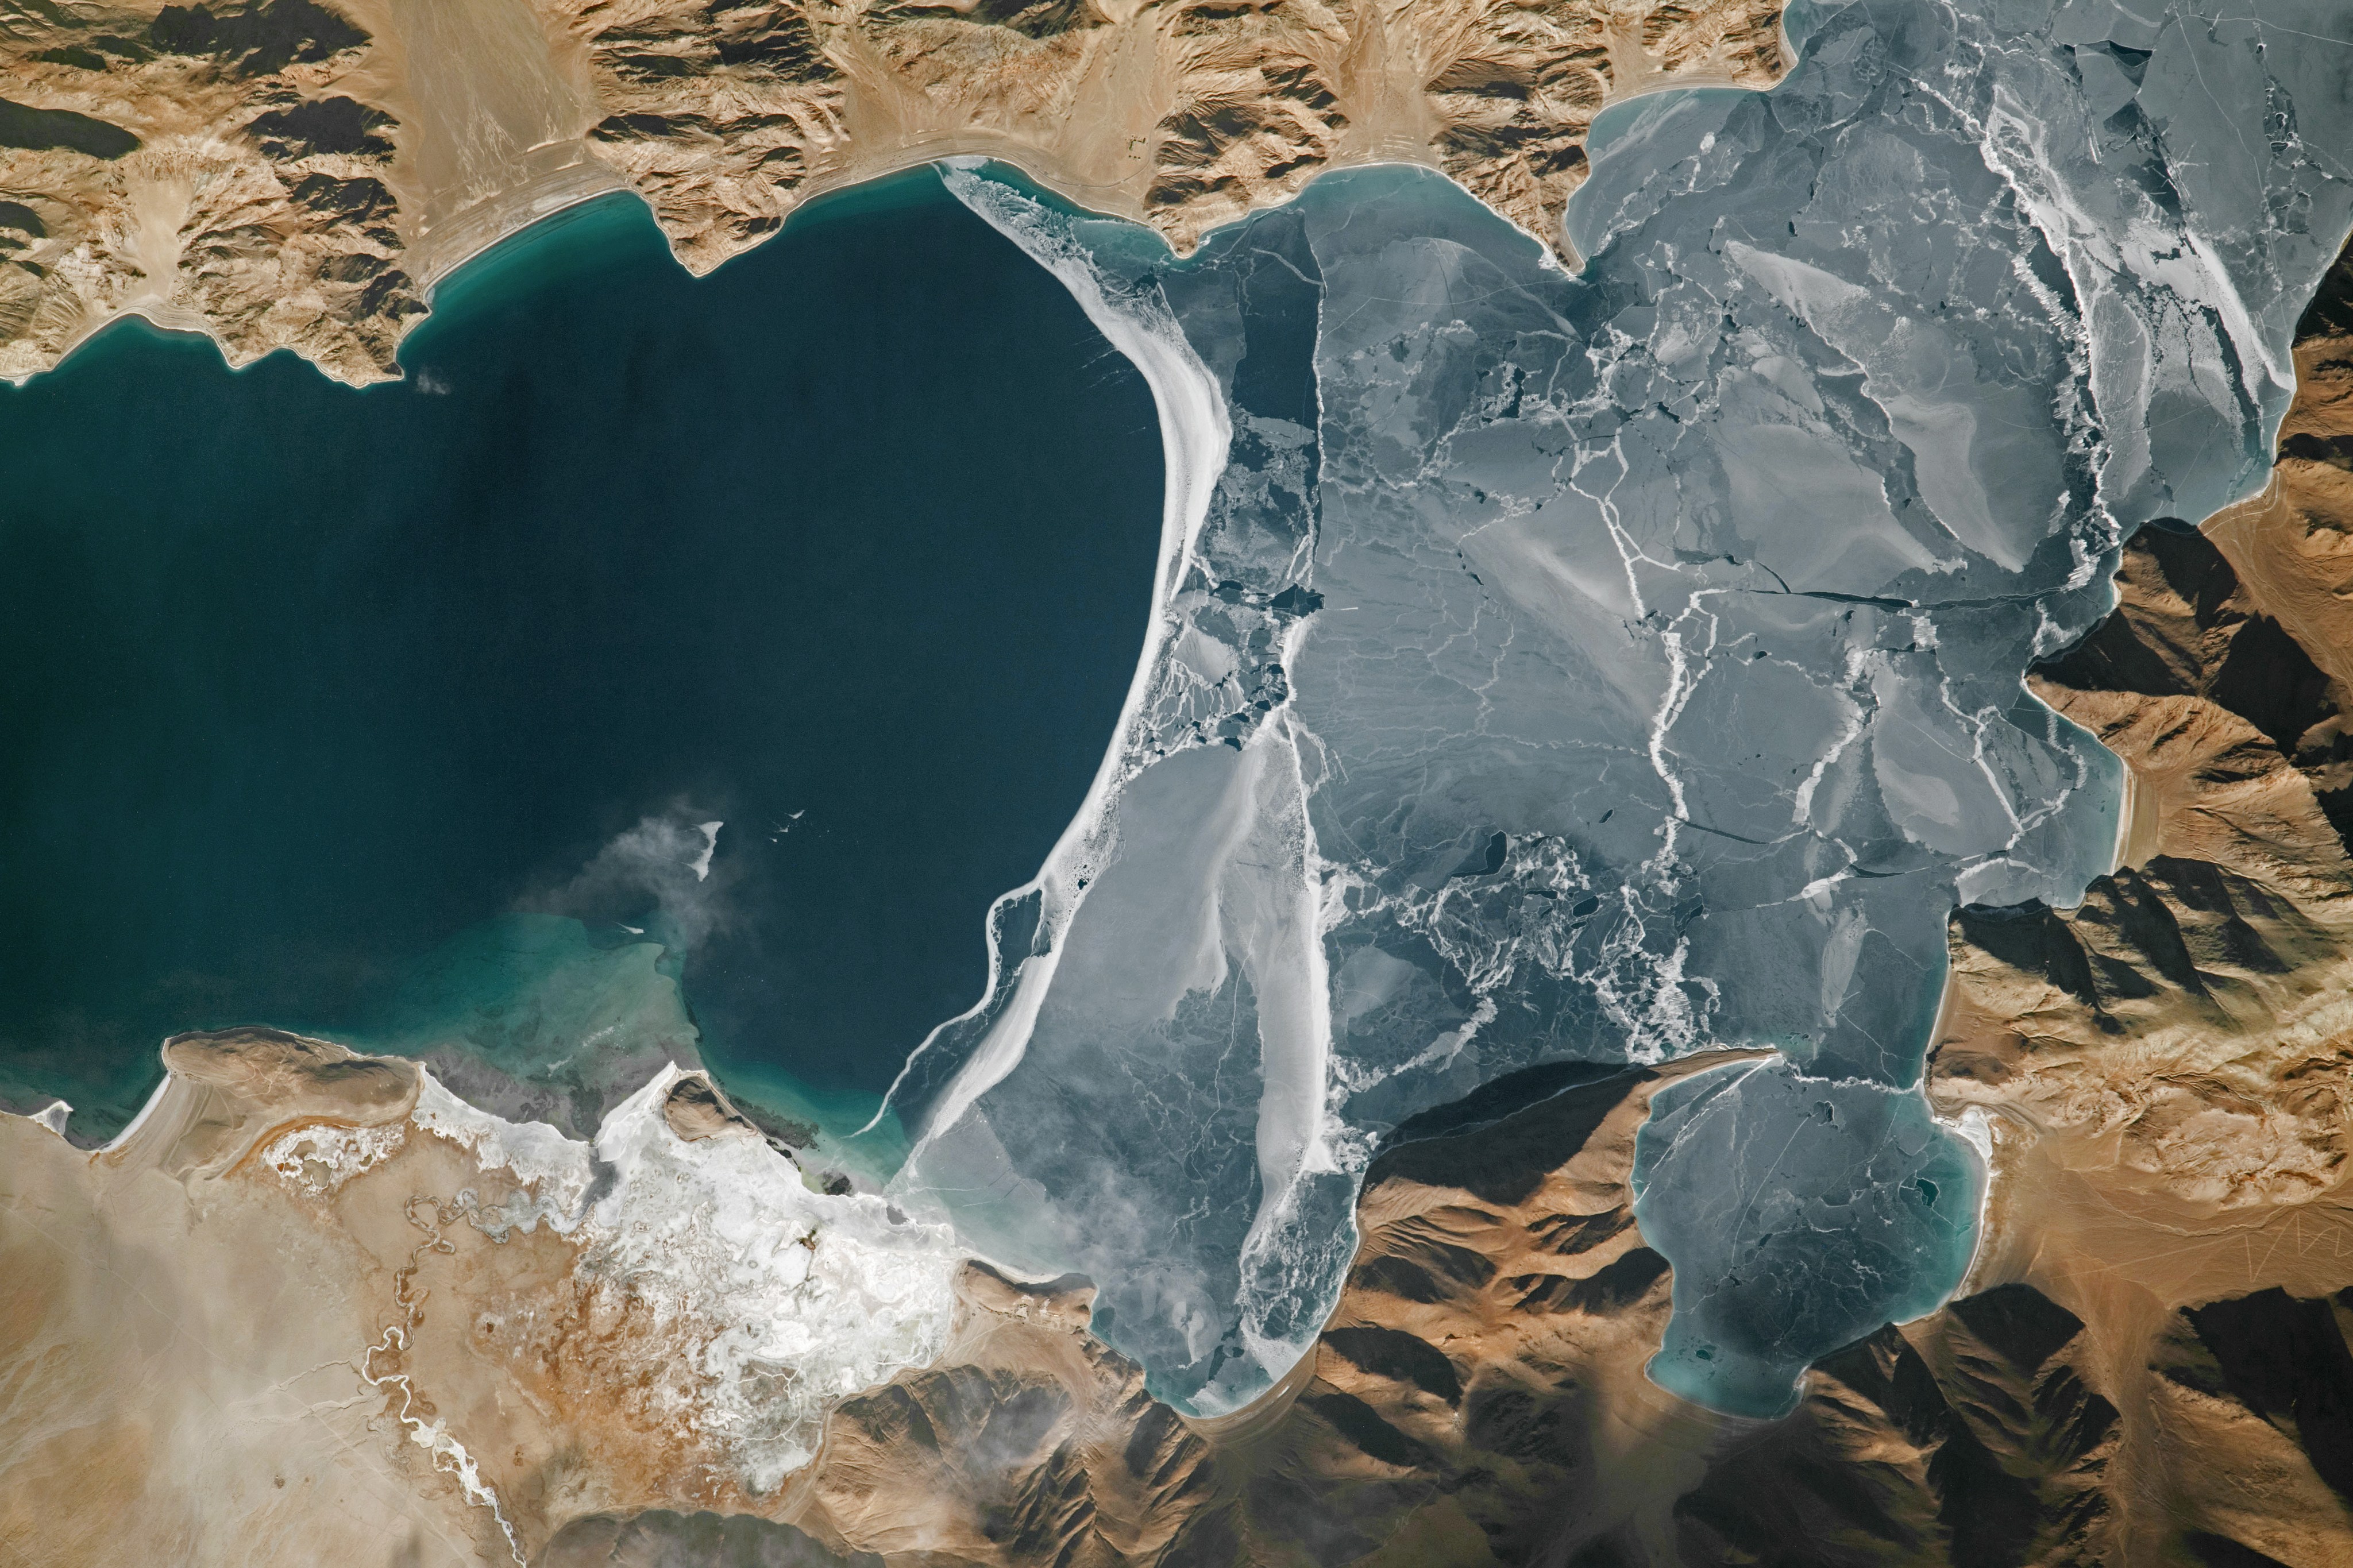 In this winter scene, a sheet of cracked ice tops part of the lake (right side of the image). On the left side, open water appears blue. Shallow water offshore of a delta, formed by a small, winding river, appears green. Several roads cut across the landscape, including one with switchbacks that ascends a steep slope.